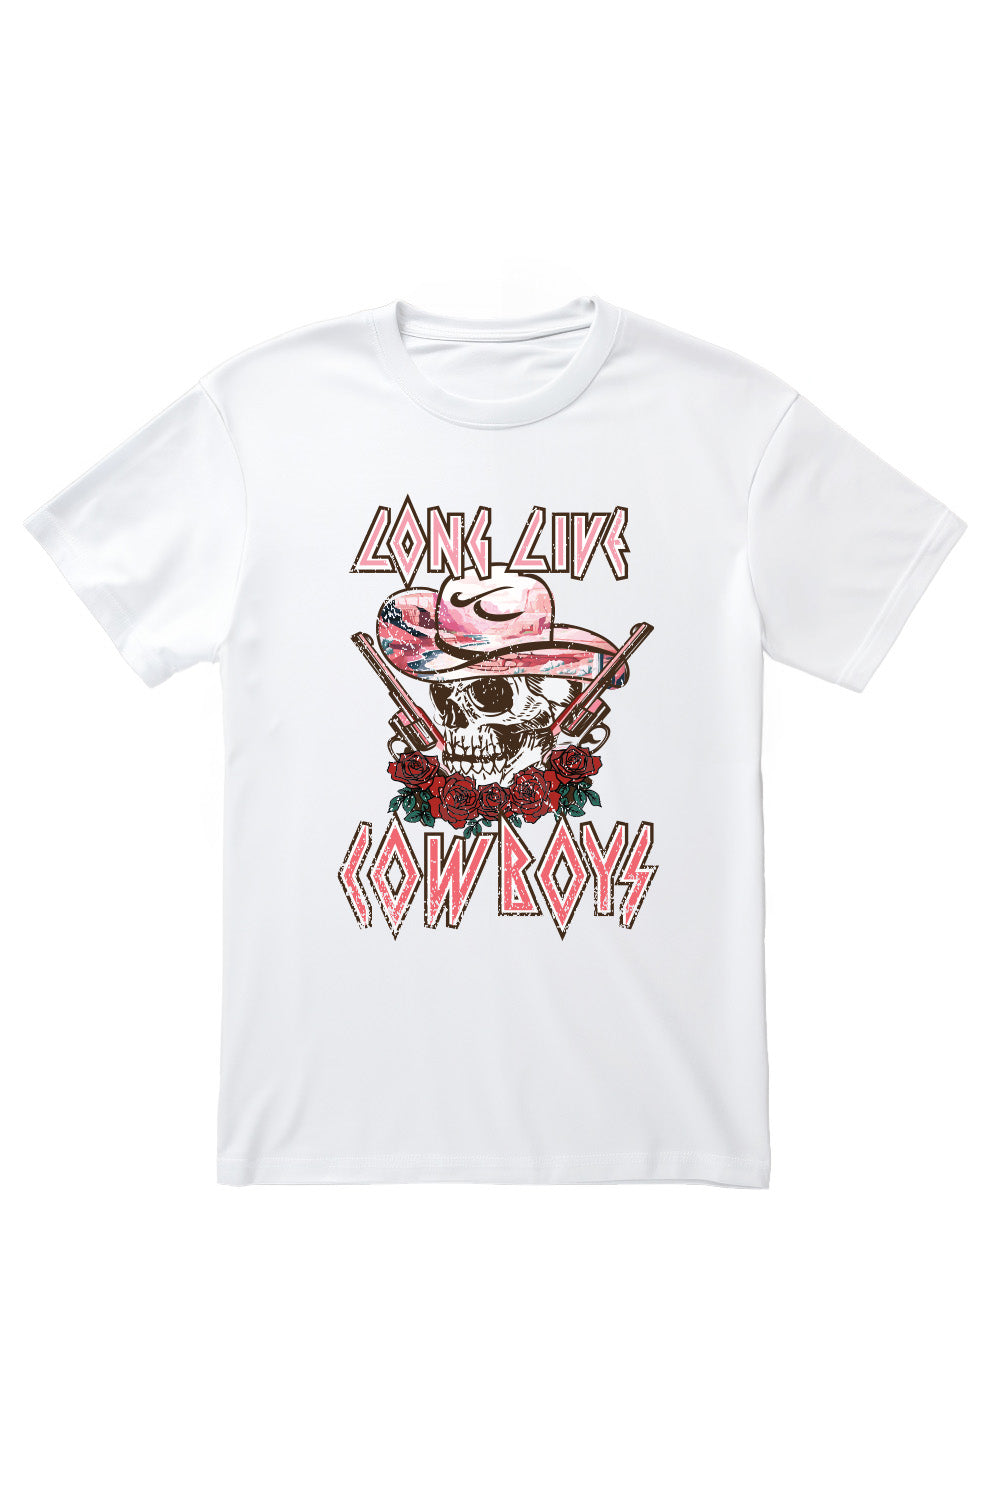 Cowboy boots with flowers T-Shirt in White (Custom Packs)